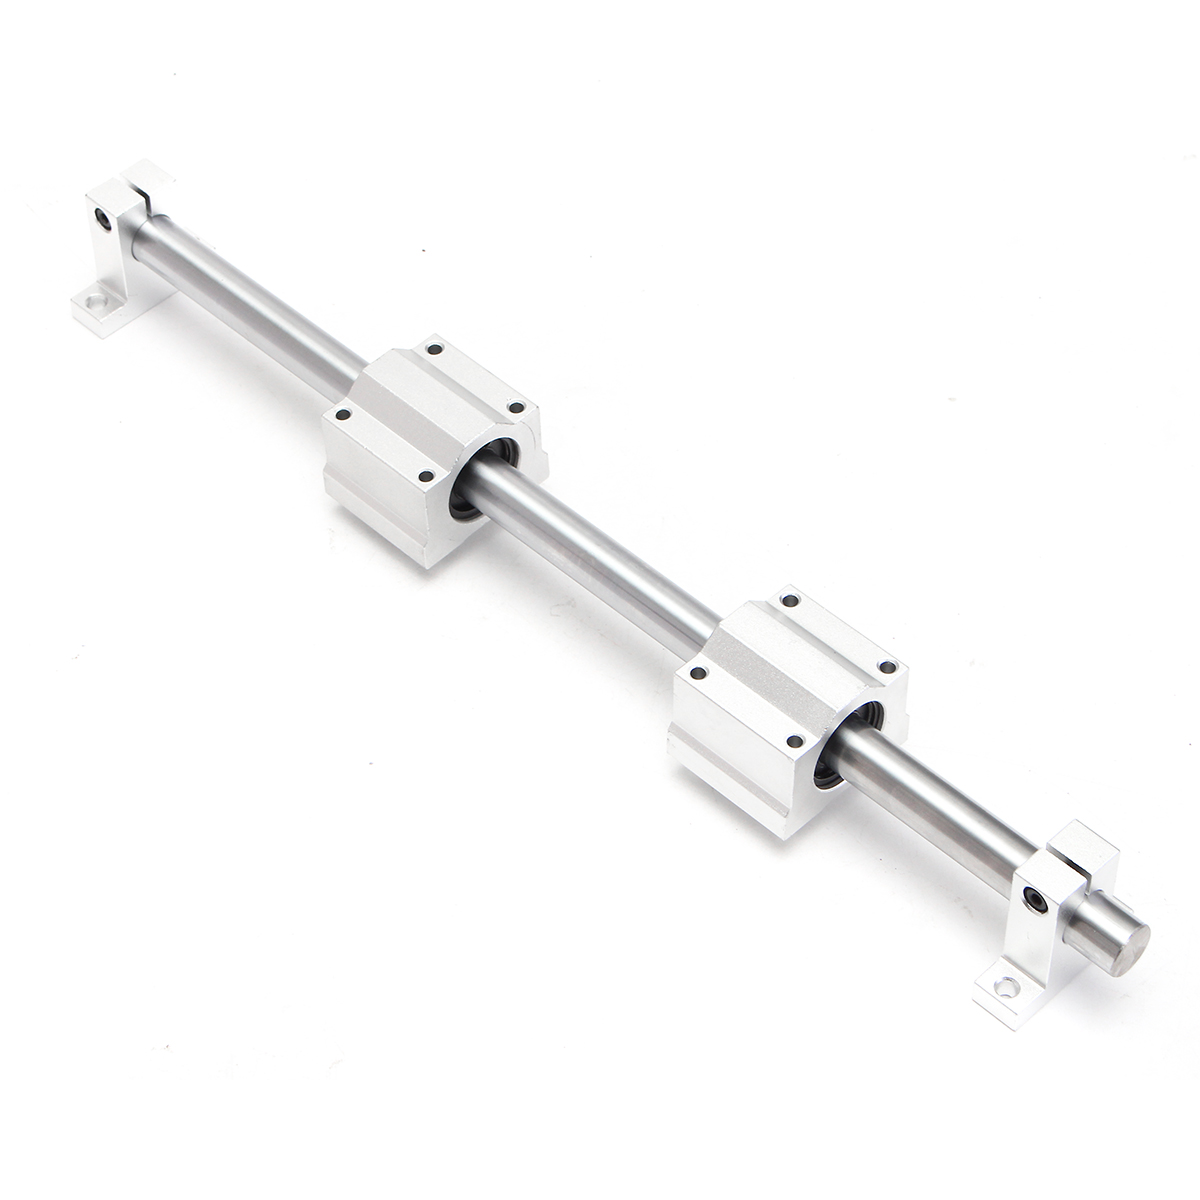 Machifit 16mm x 1000mm Linear Rail Shaft With Bearing Block and Guide Support For CNC Parts